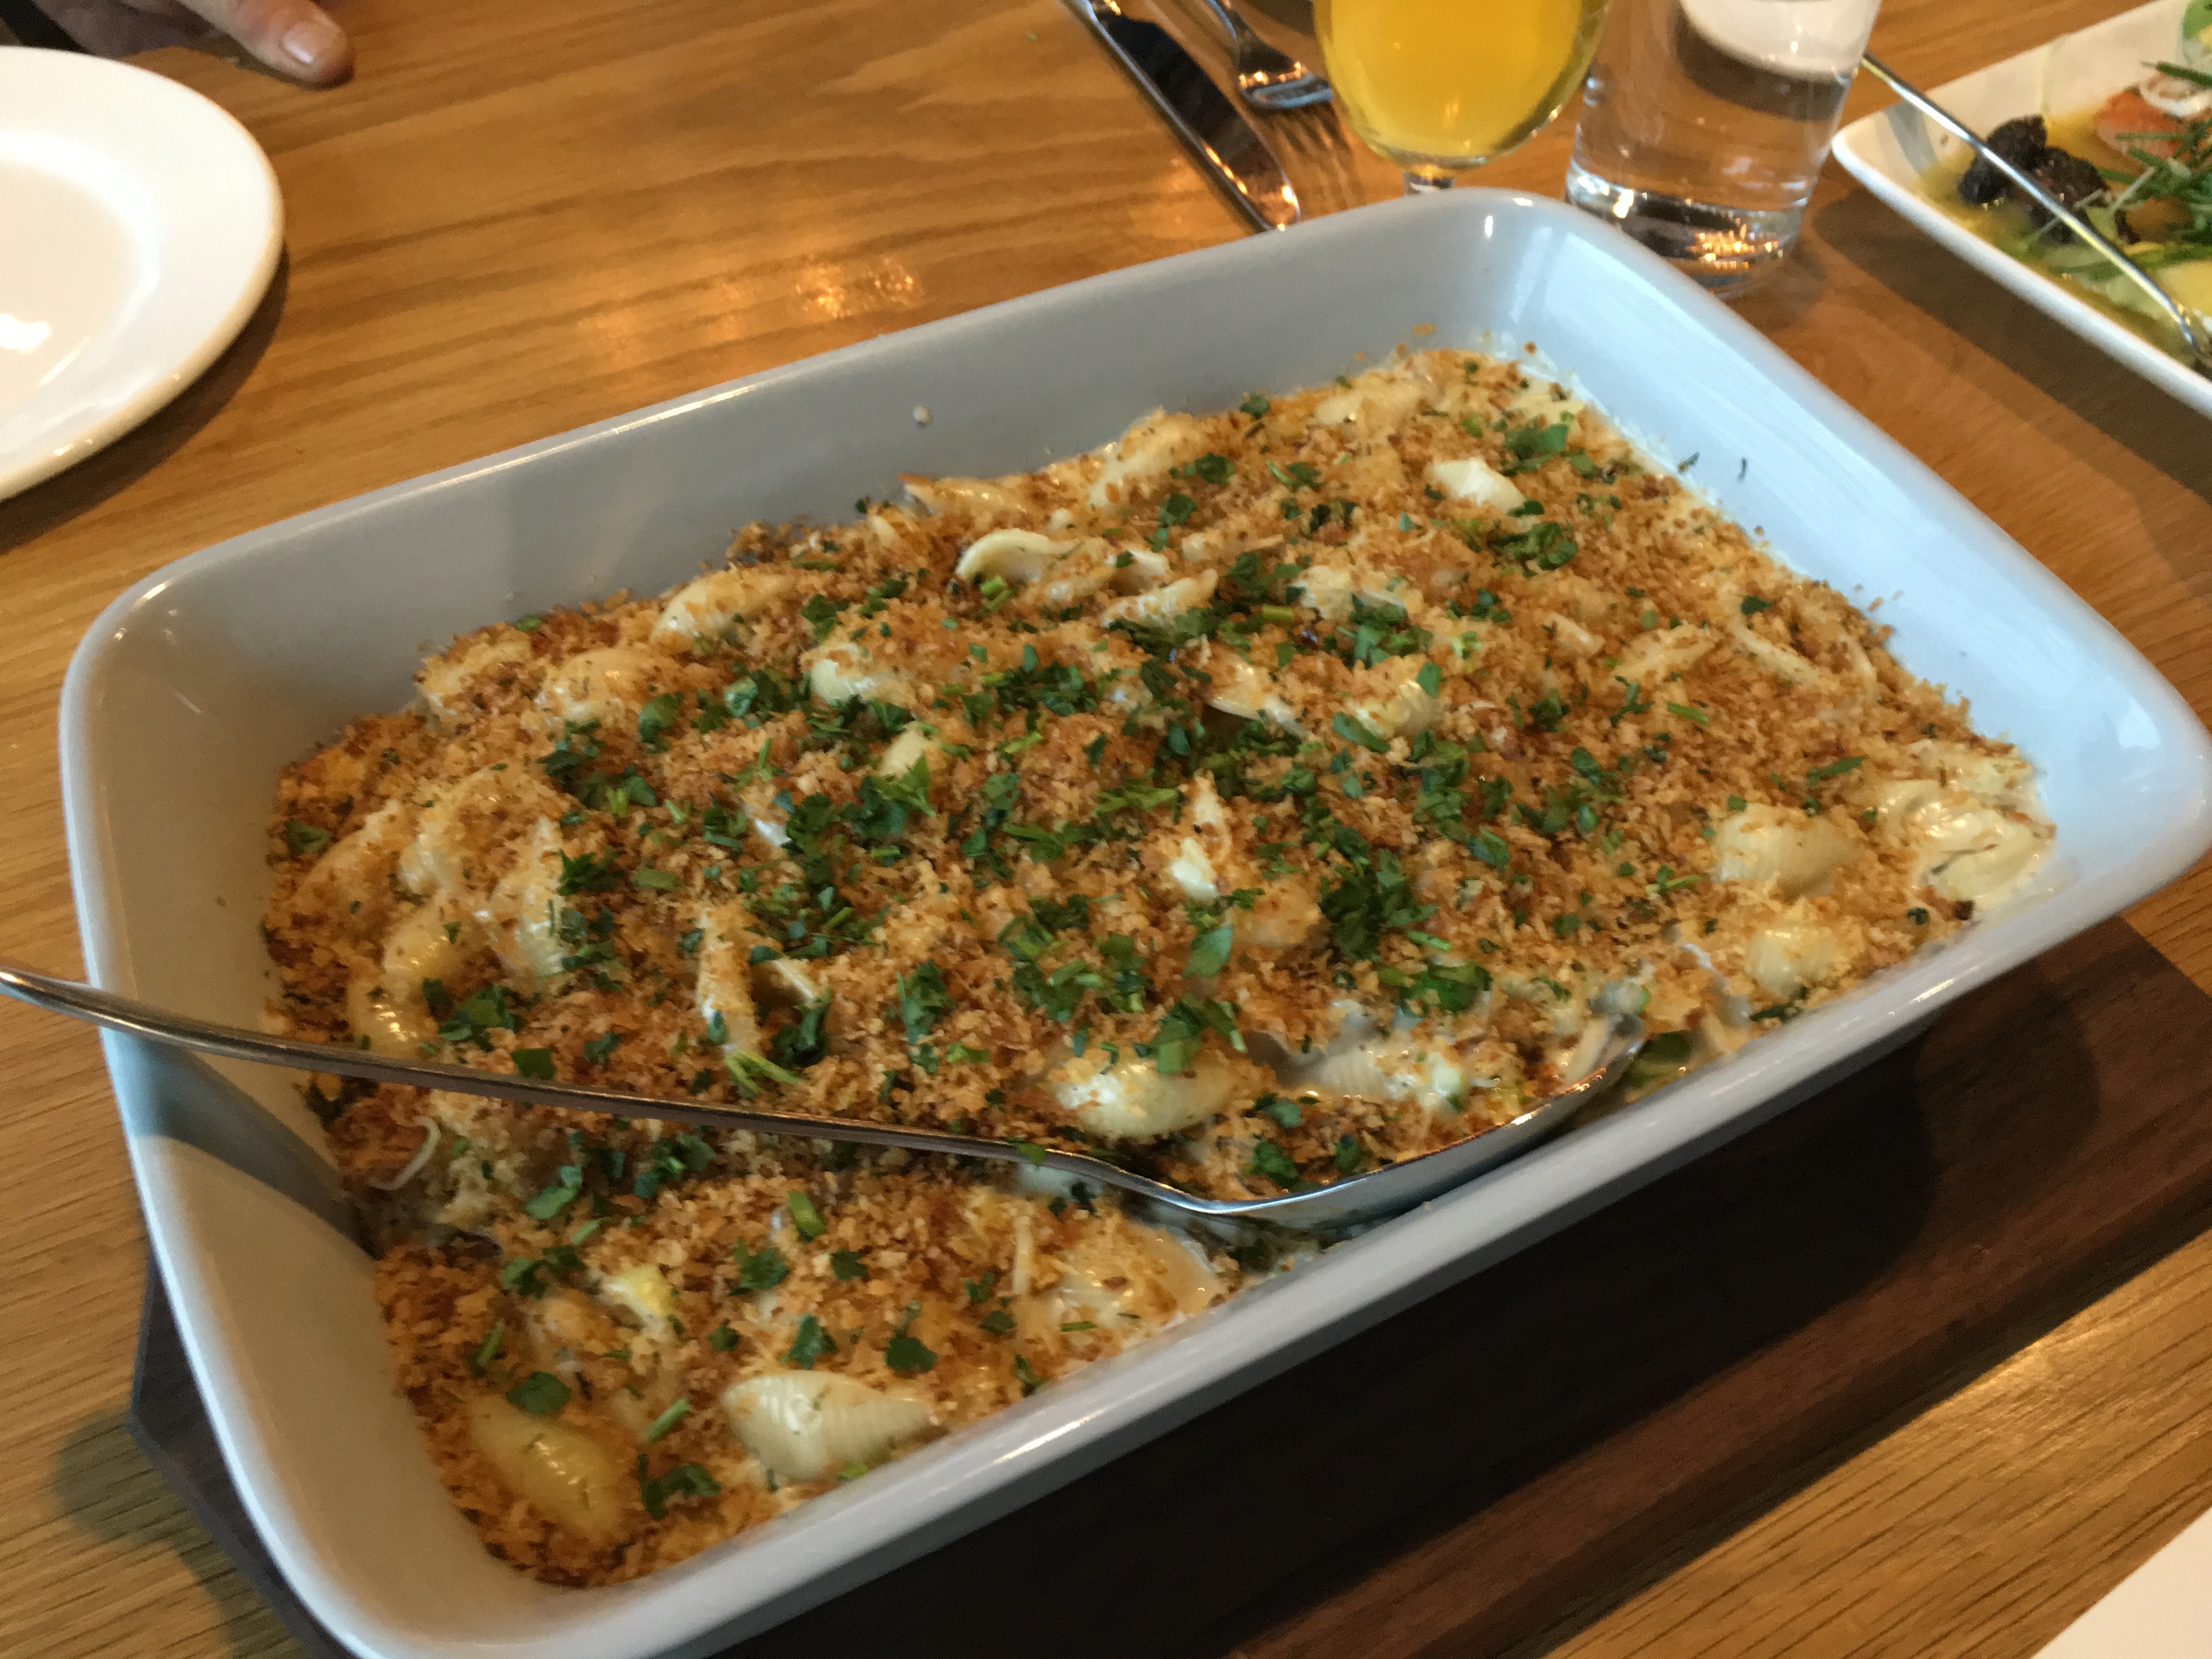 At a recent Altabira City Tavern Beer Dinner, Baked Macaroni and Cheese with peas, wild mushrooms, leeks and herb breadcrumbs was served.